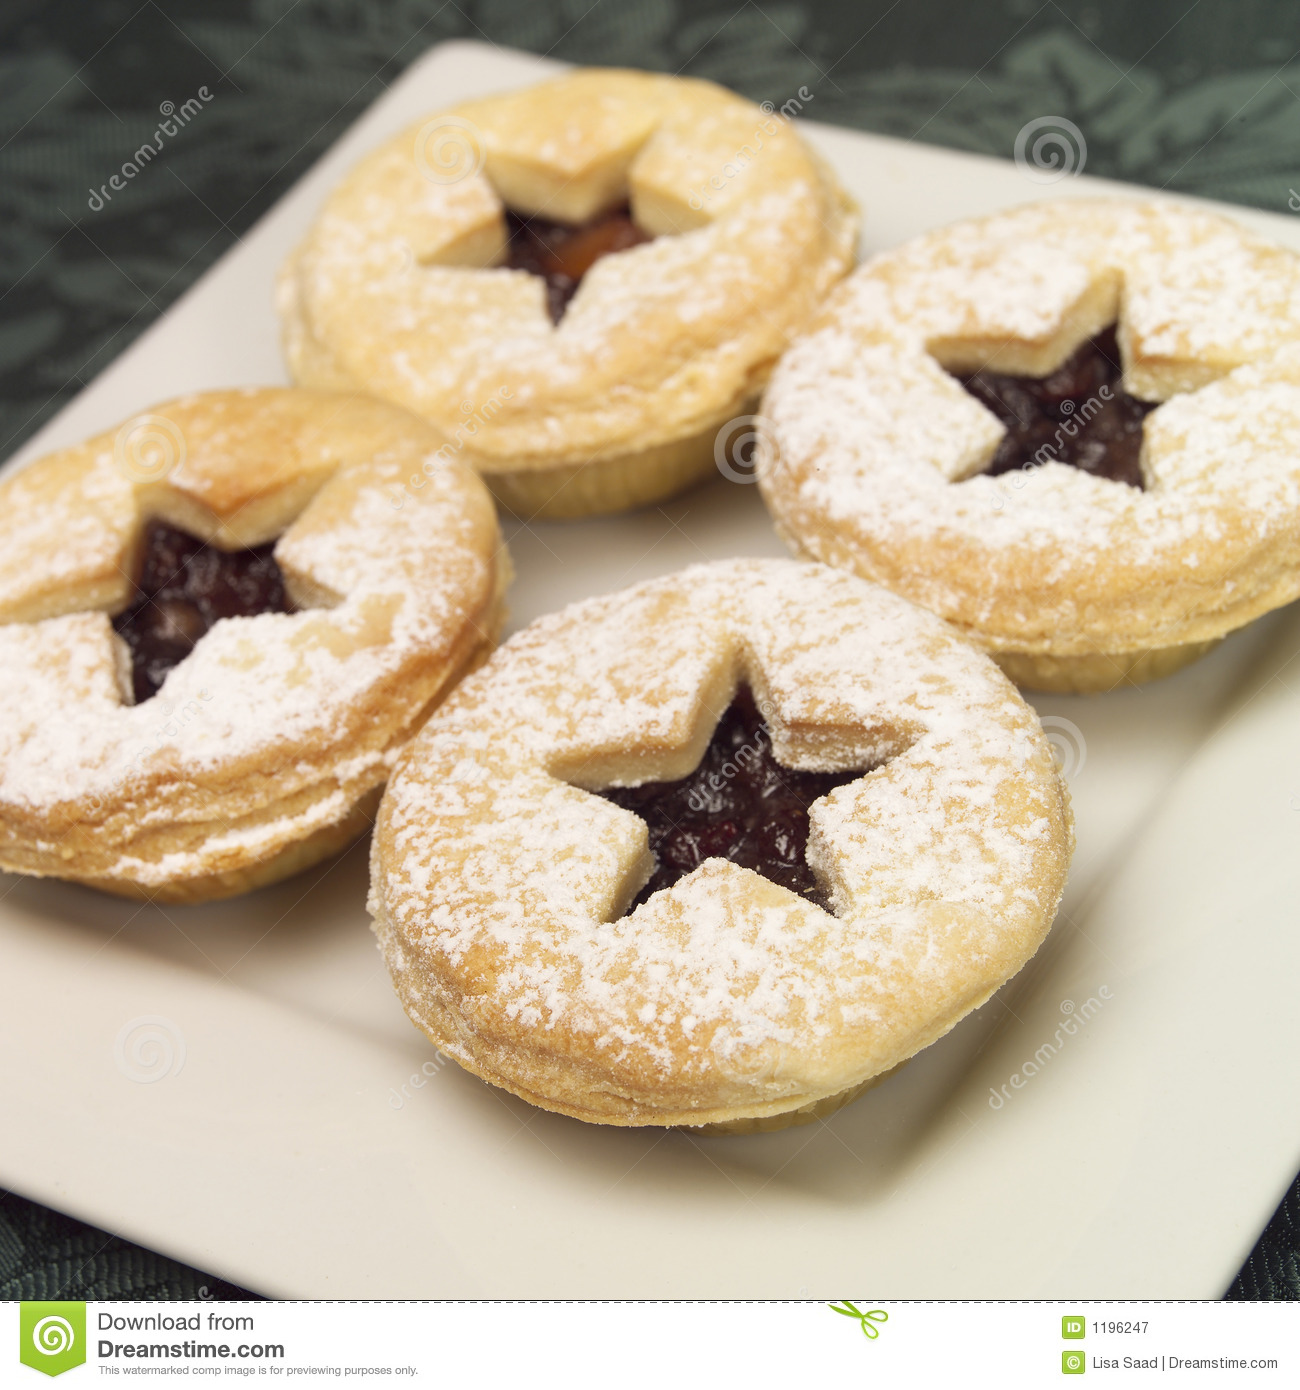 Star Fruit Mince Pies Royalty Free Stock Photography   Image  1196247